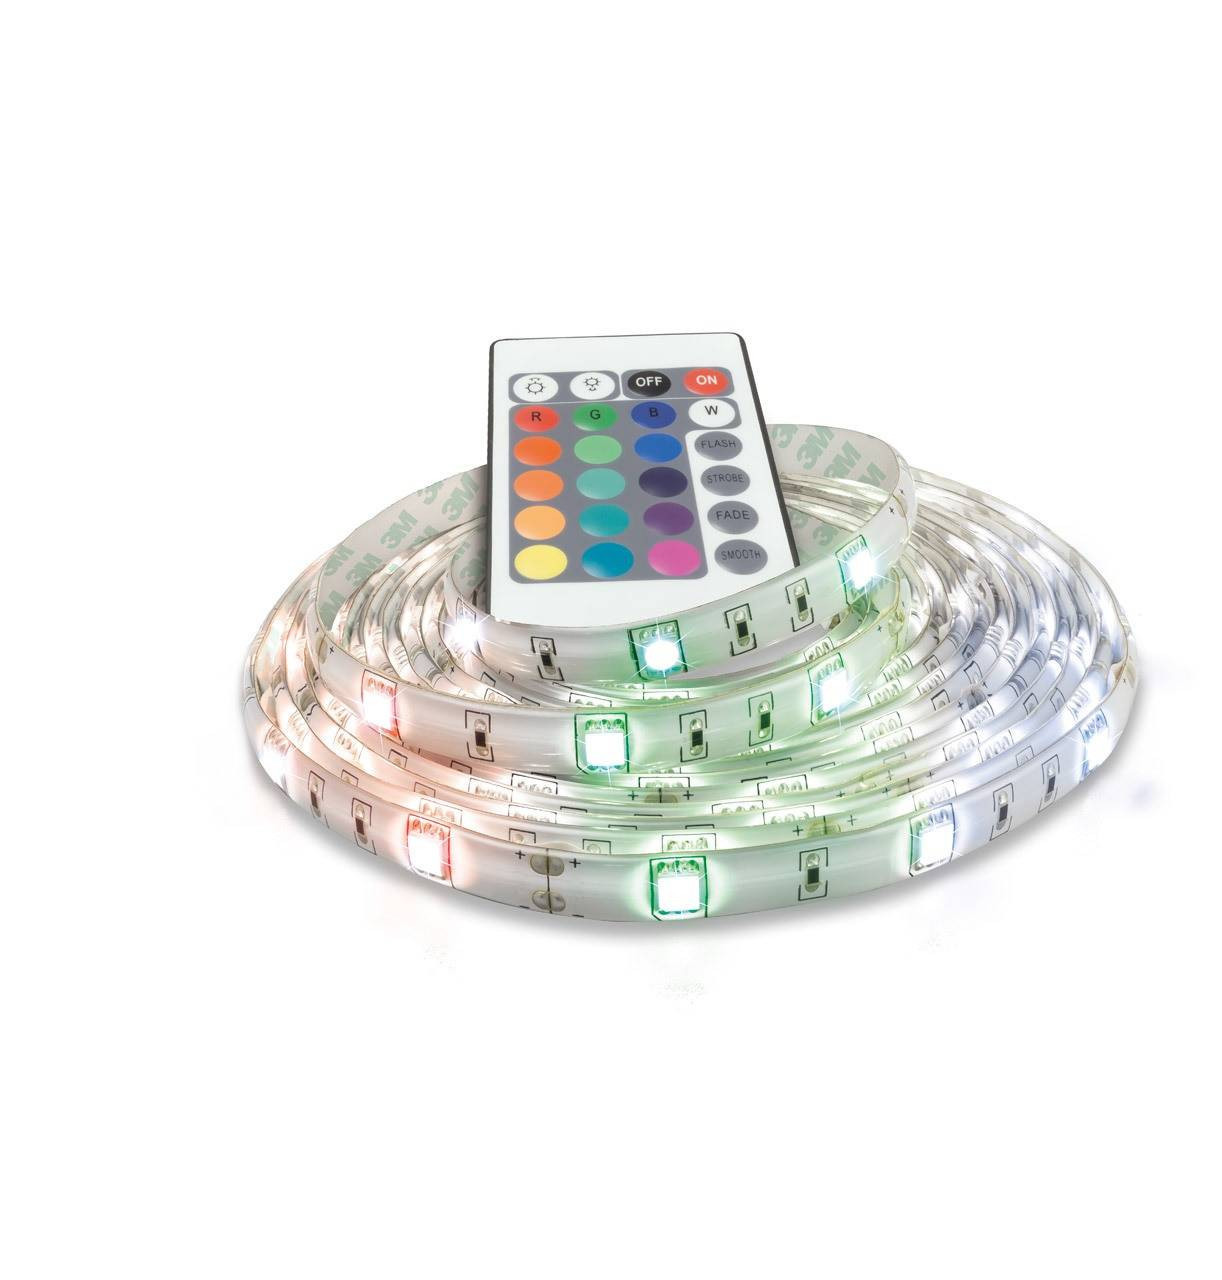 LED strip lights are a versatile, energy-efficient lighting option for any home. Here's everything you need to know.